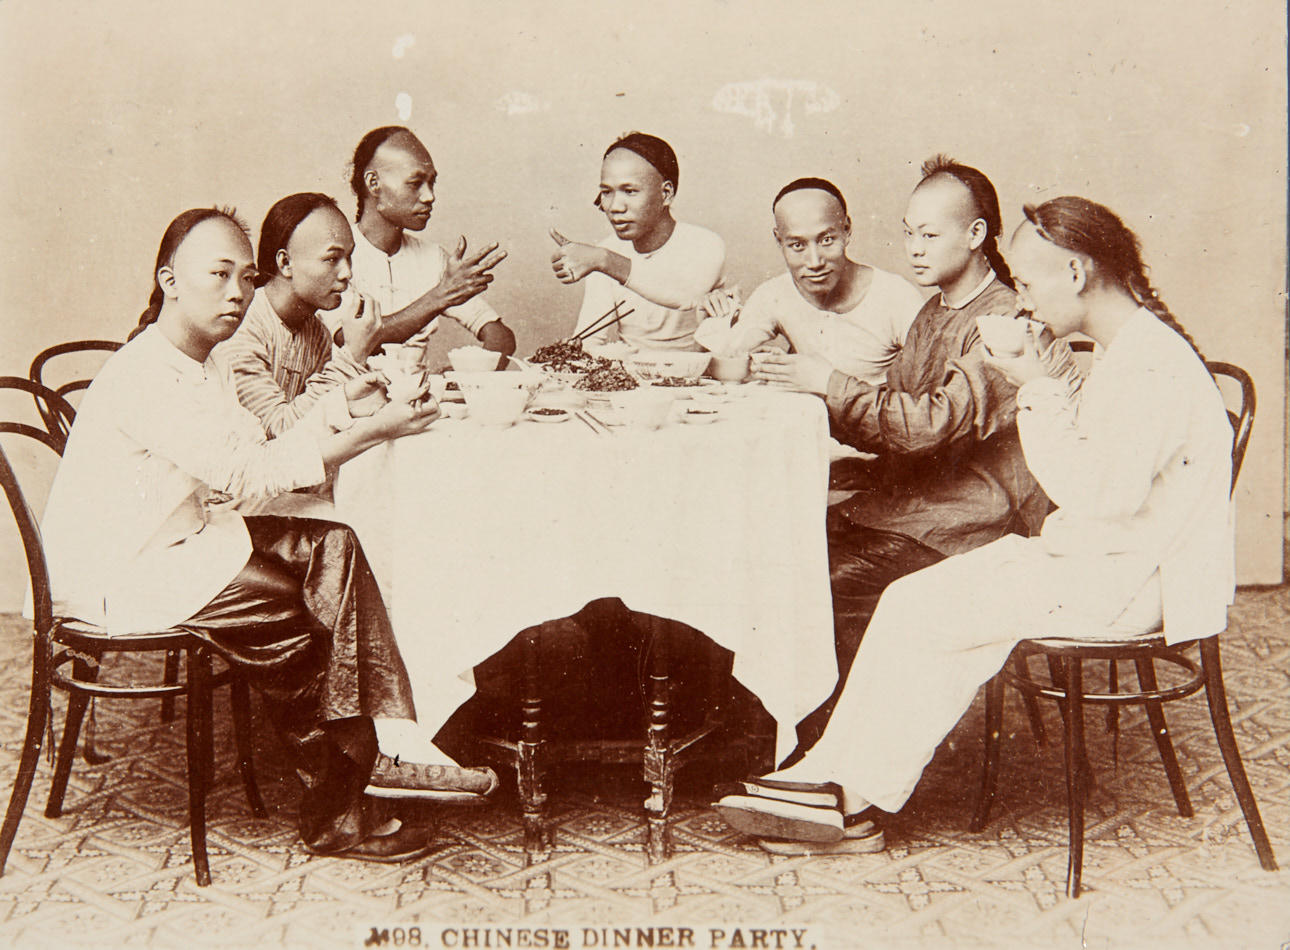 ANONYMOUS PHOTOGRAPHER  Chinese Dinner Party / Morship Joss, China 1870s